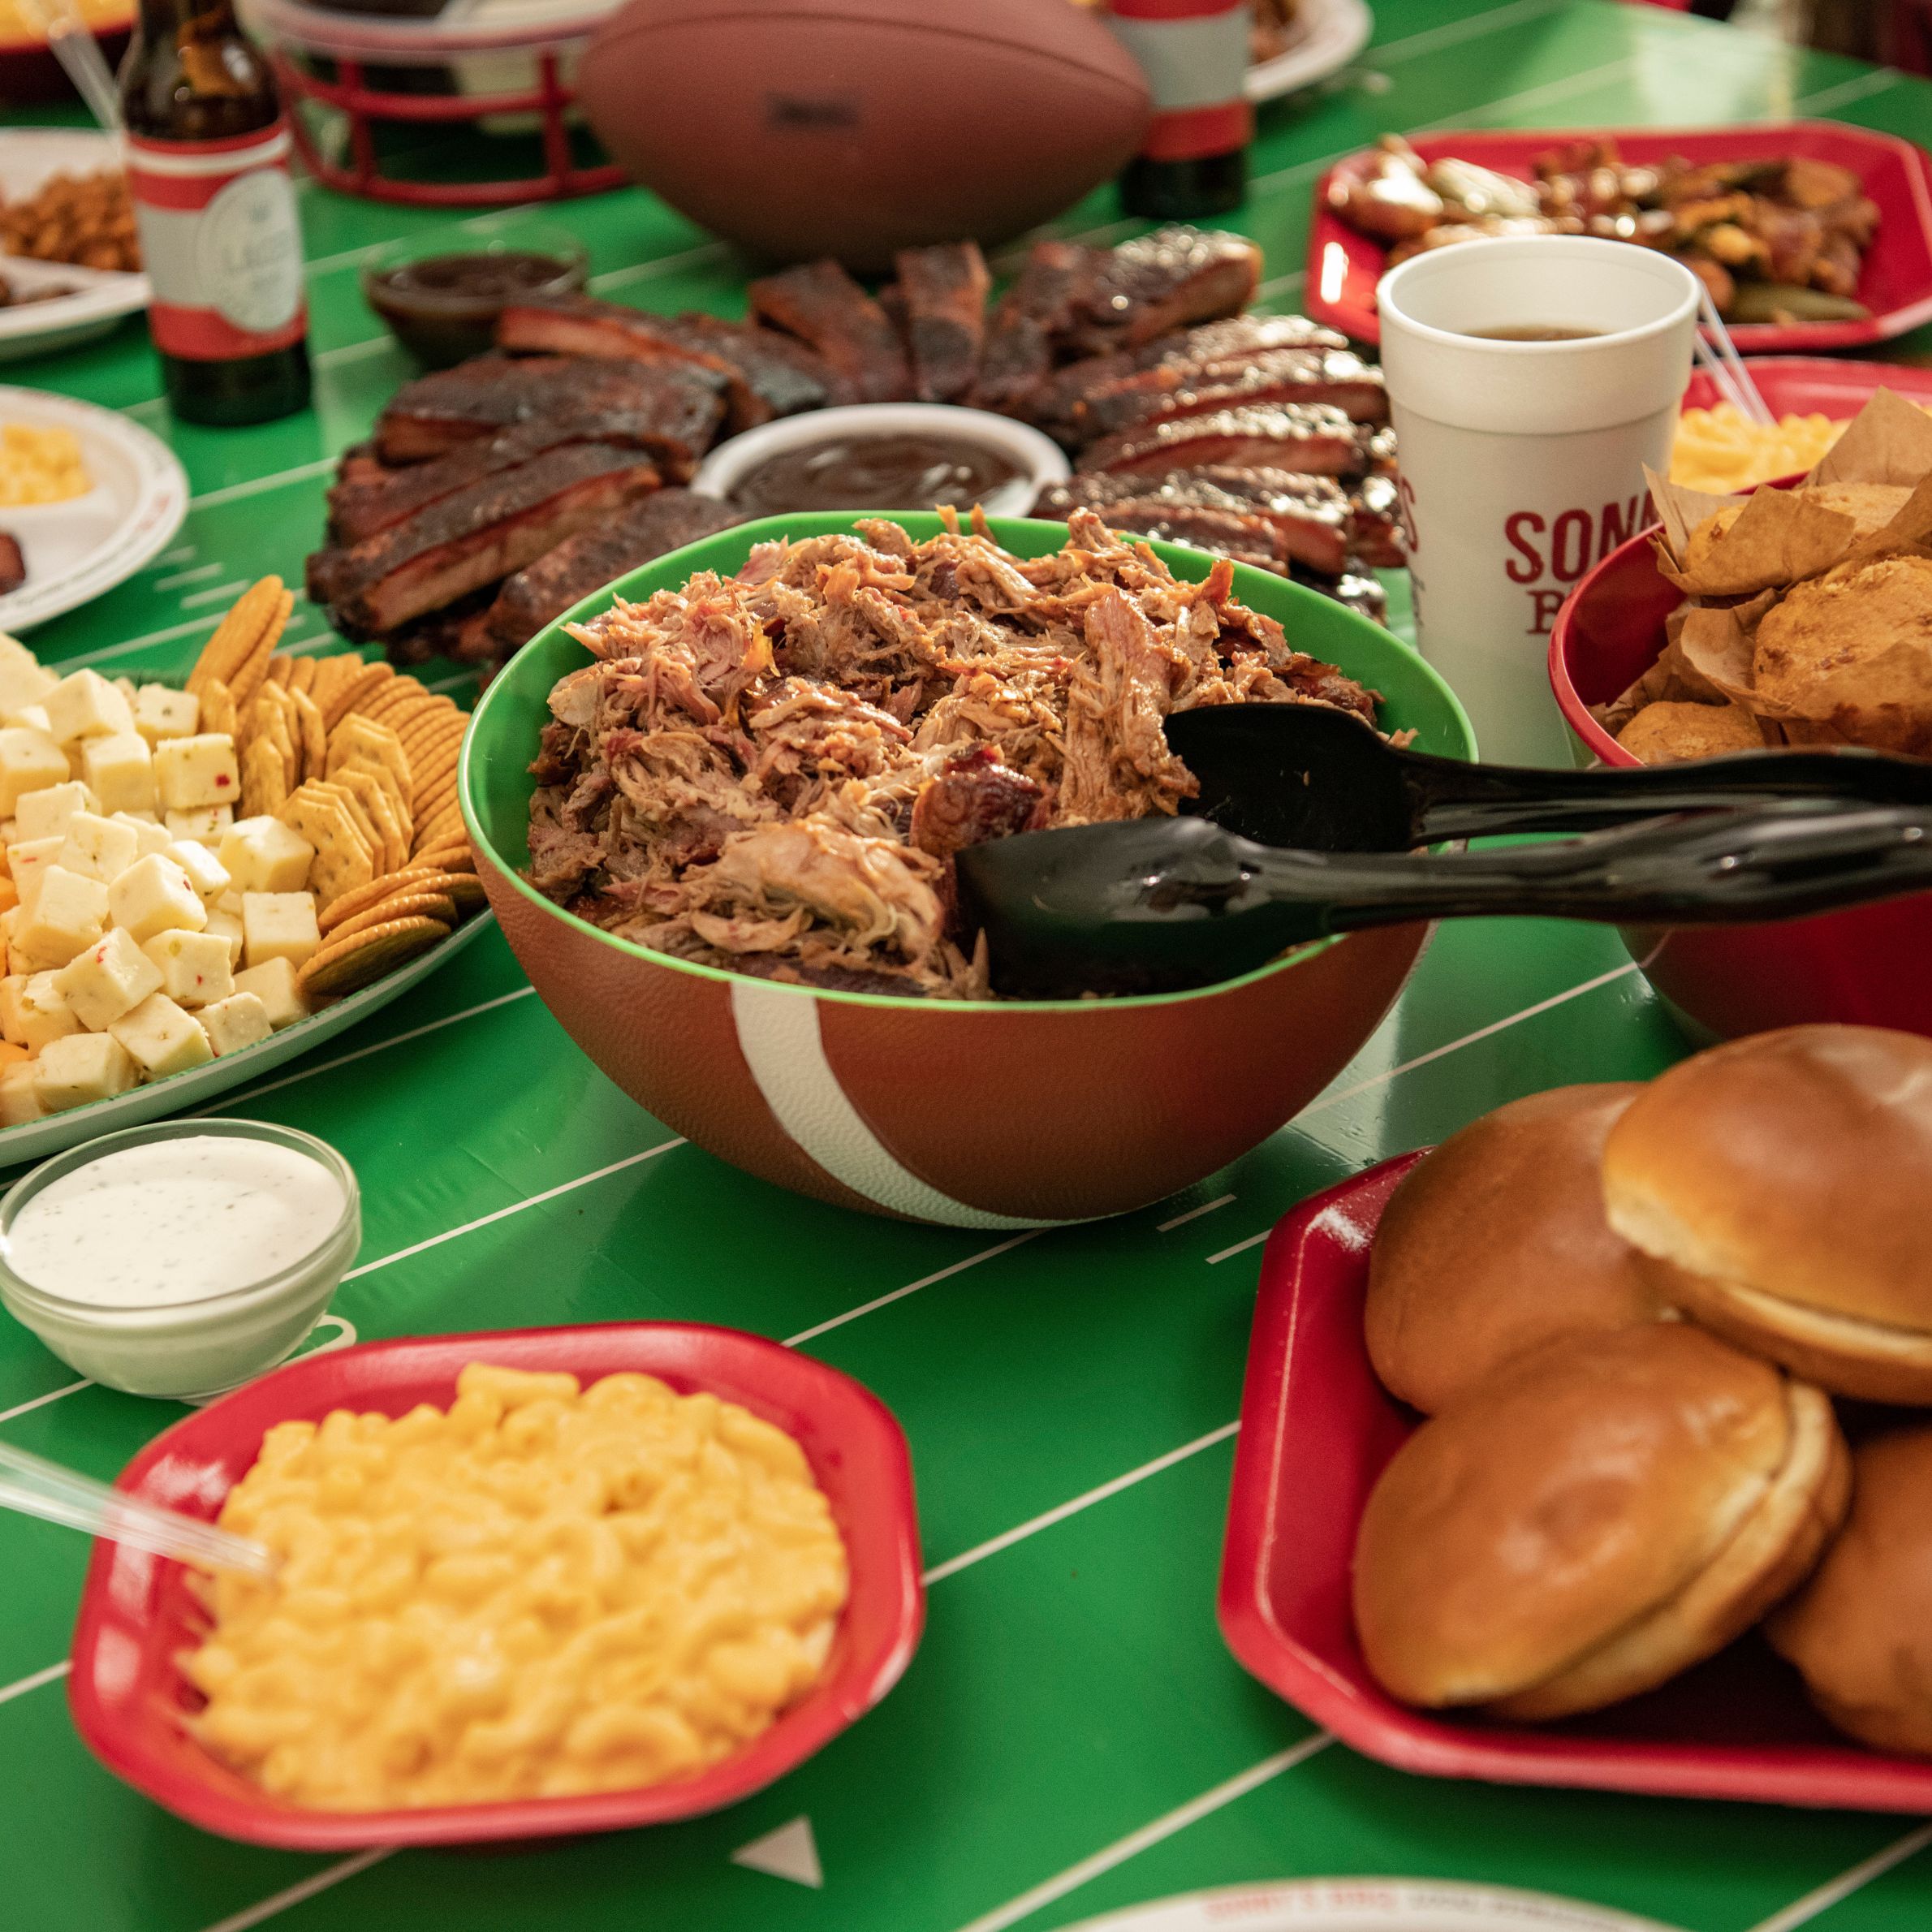 Catering spread of Pulled Pork, Mac & Cheese, Crackers, Buns, Cornbread, Ribs and more at a Tailgate